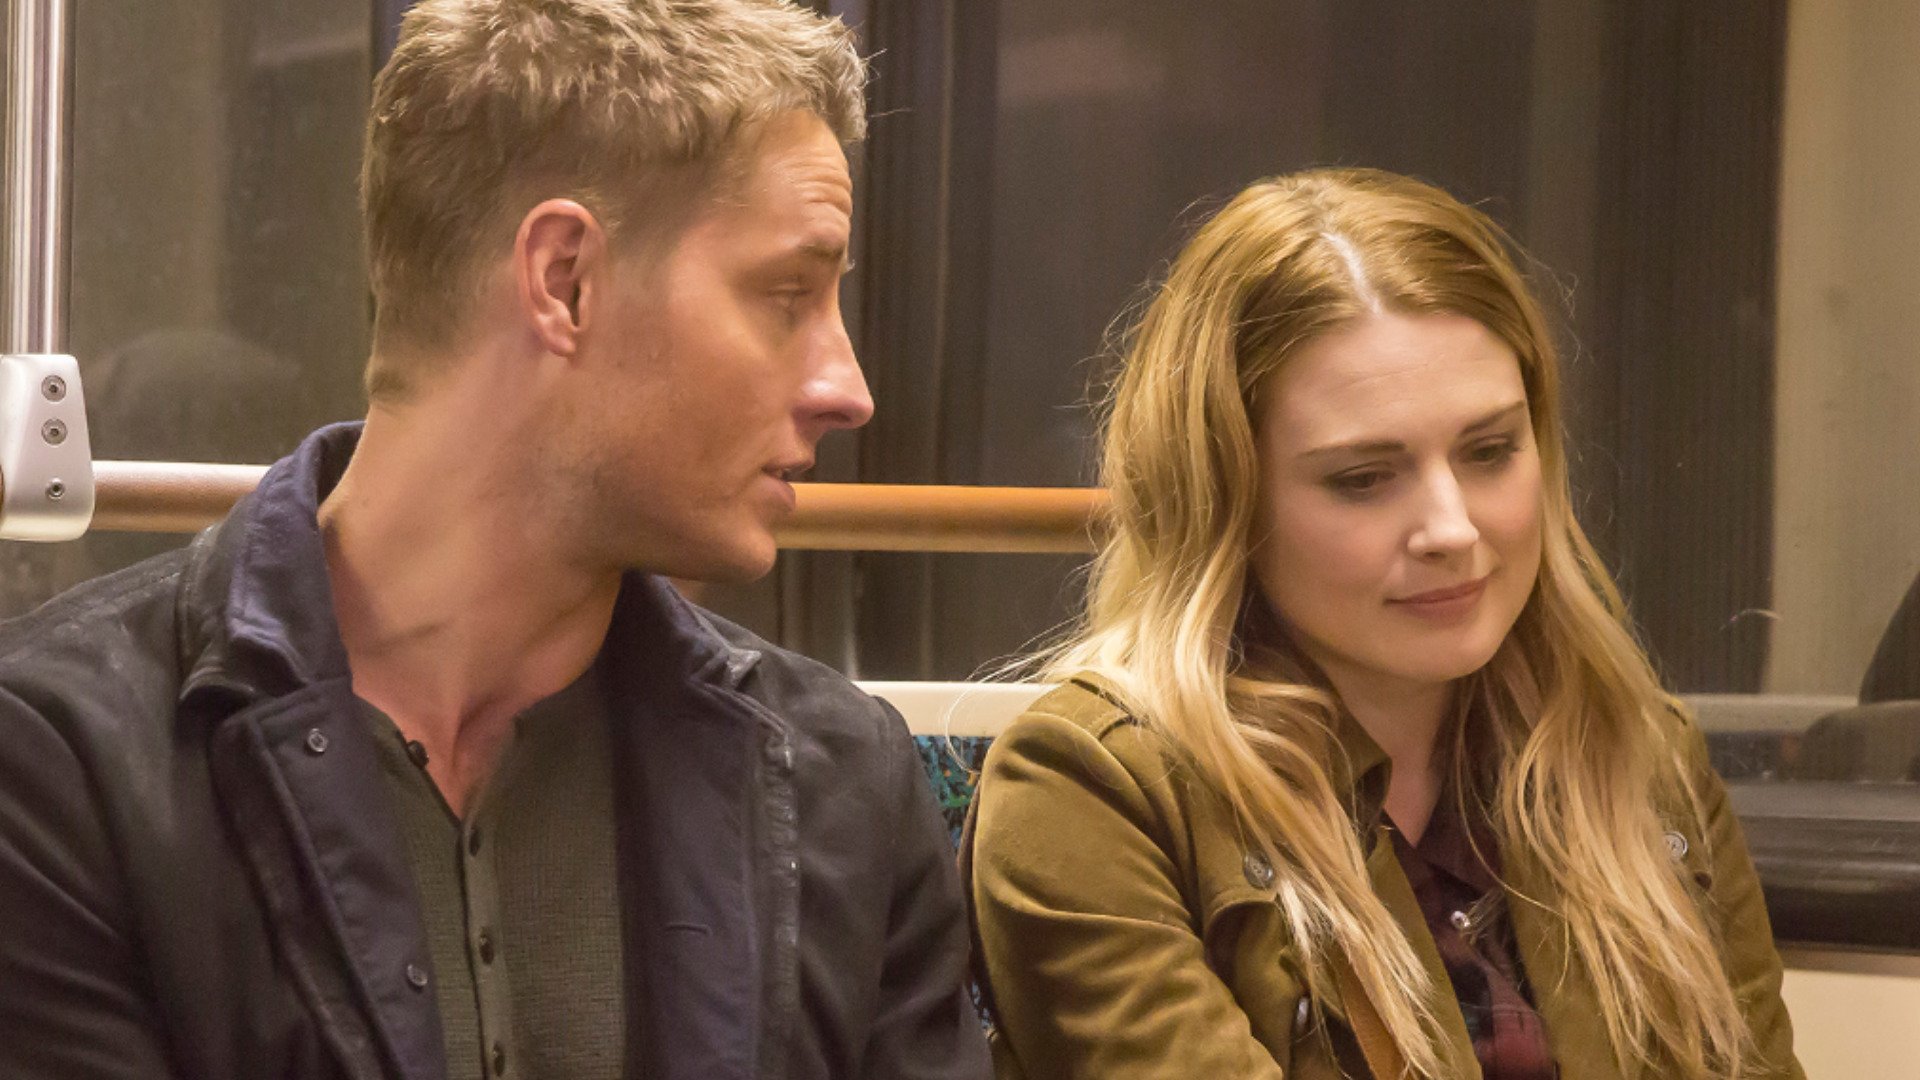 Justin Hartley as Kevin and Alexandra Breckenridge as Sophie talking on the subway in ‘This Is Us’ Season 1